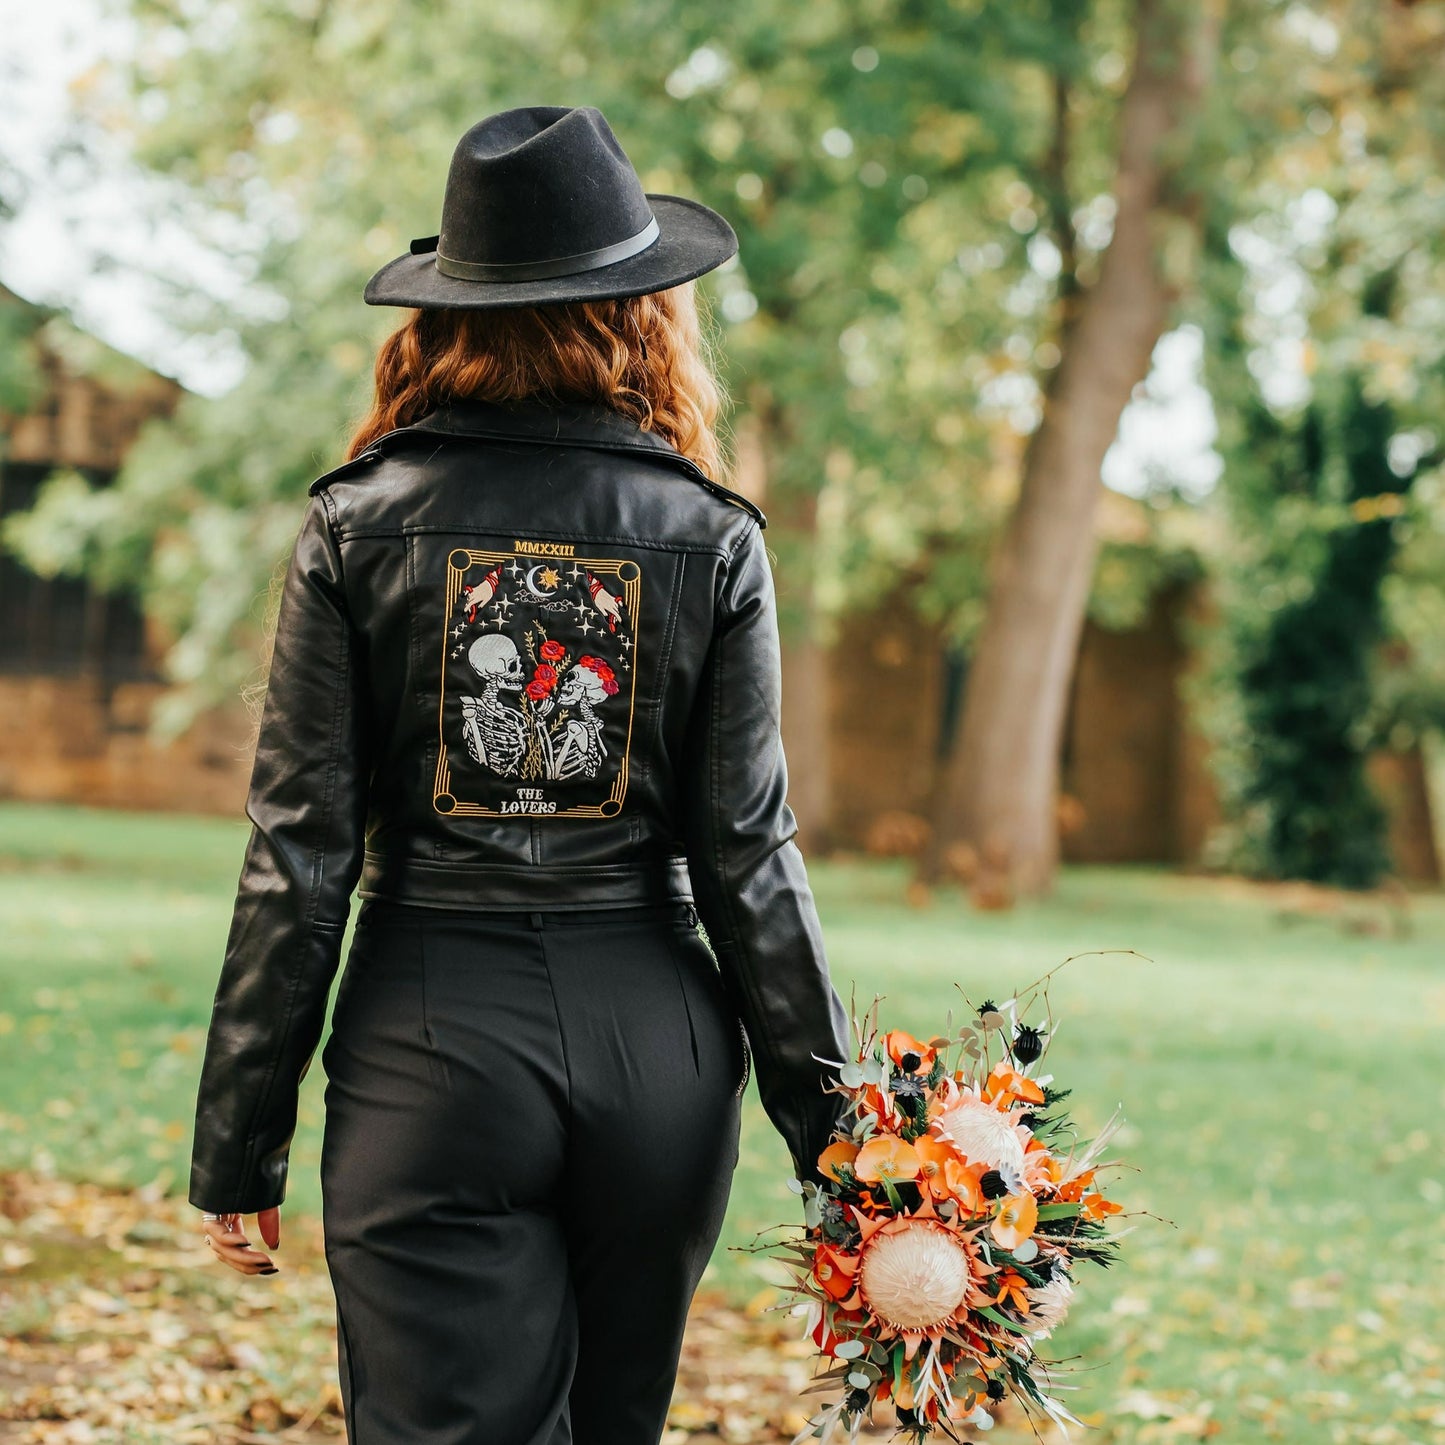 Black bride leather jacket featuring The Lovers Tarot Card – a unique and custom bridal cover-up for a wedding ensemble with mystical and symbolic flair